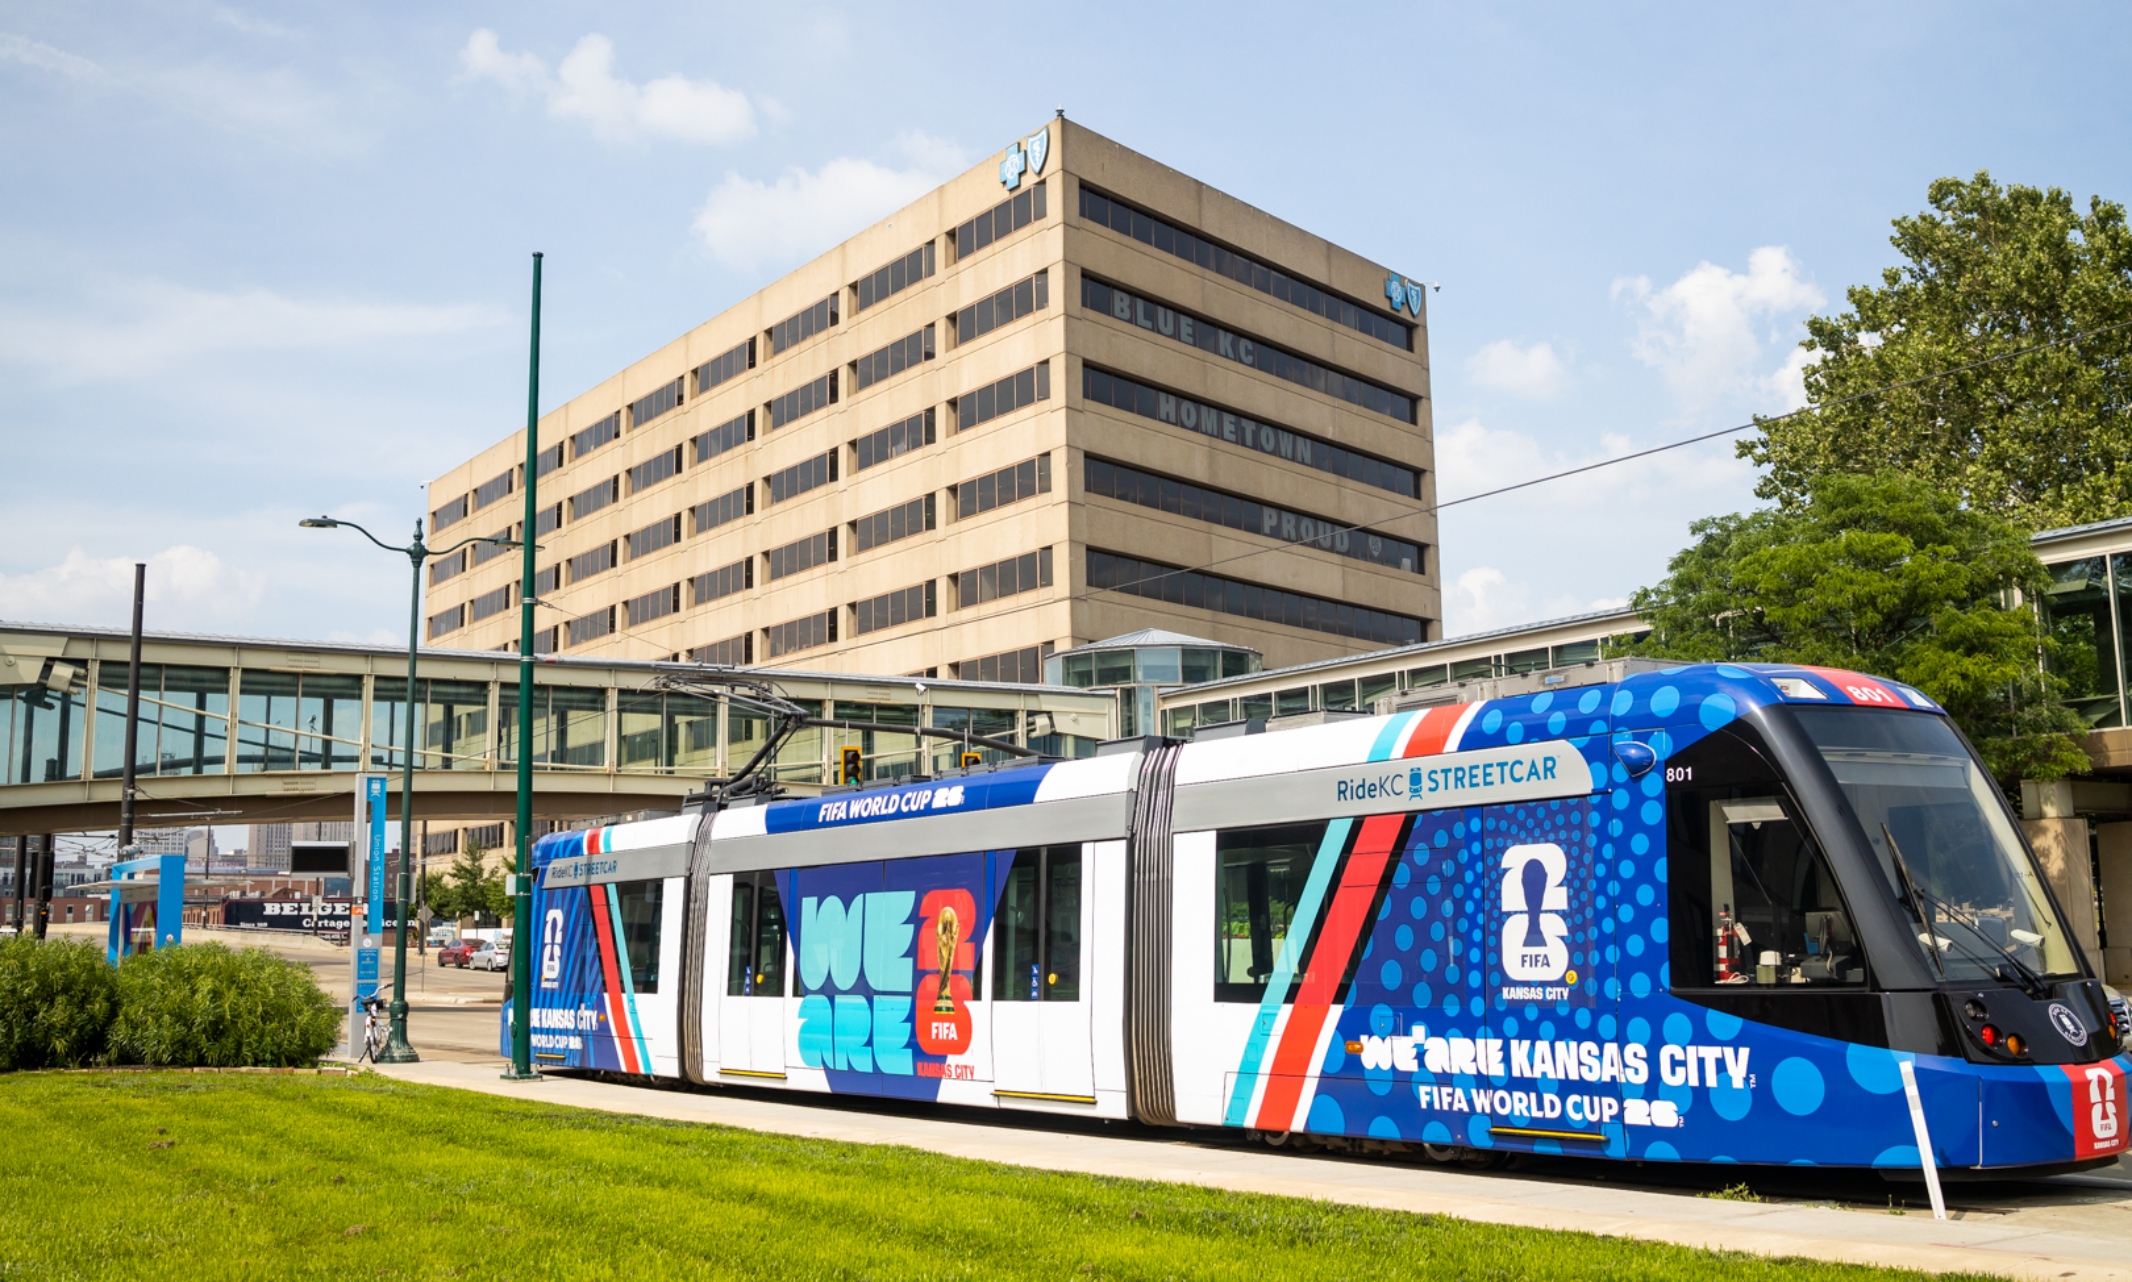 The Kansas City streetcar sits in front of the Blue Cross and Blue Shield building with the Link stretching above the streetcar